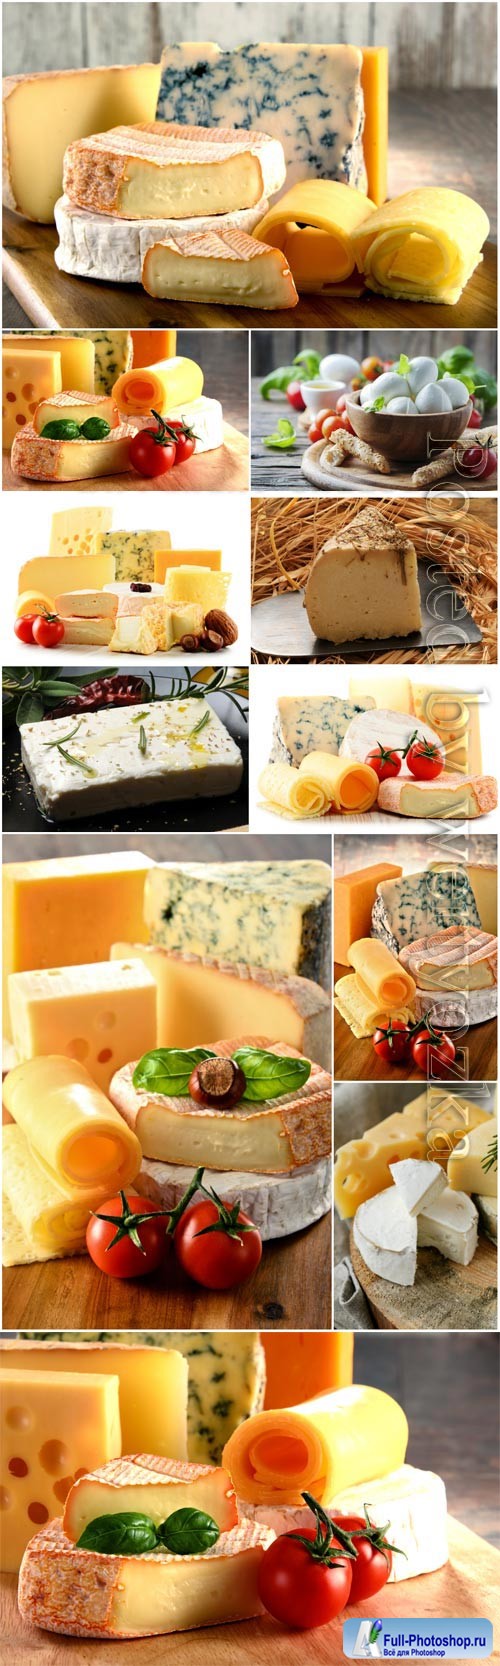 Cheese and tomatoes stock photo